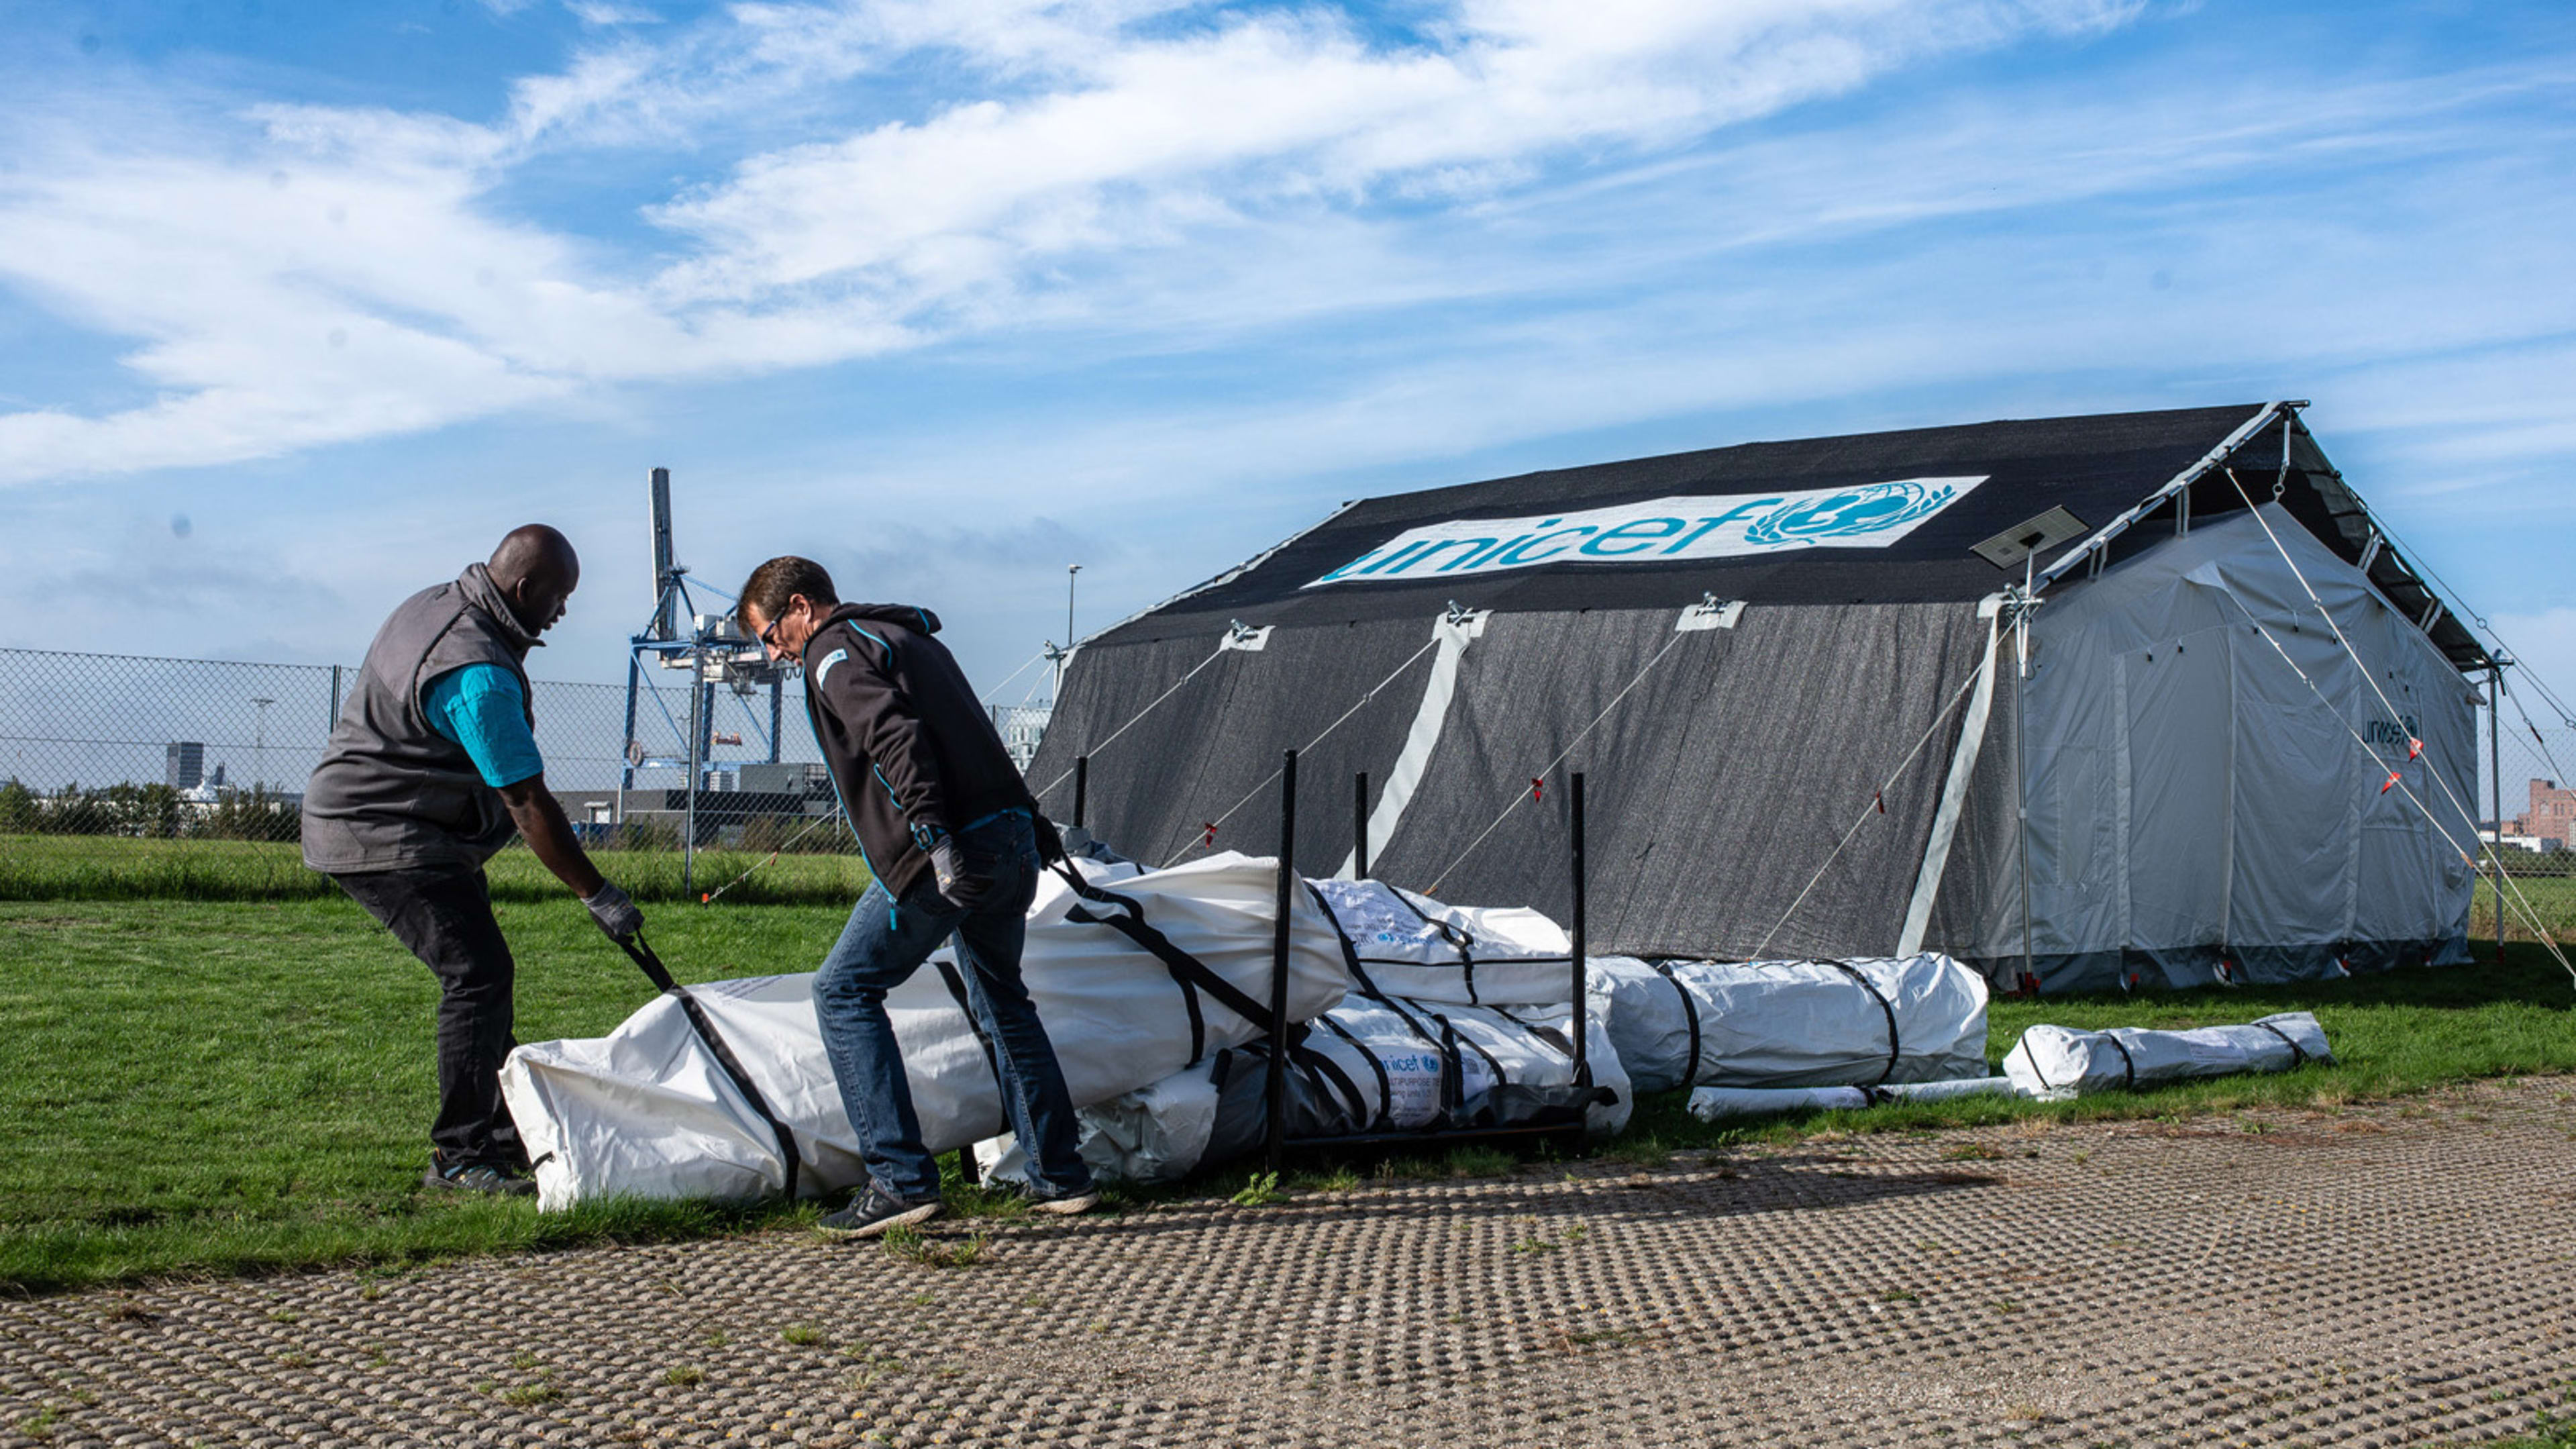 How UNICEF redesigned its tents to be ready for a changing world